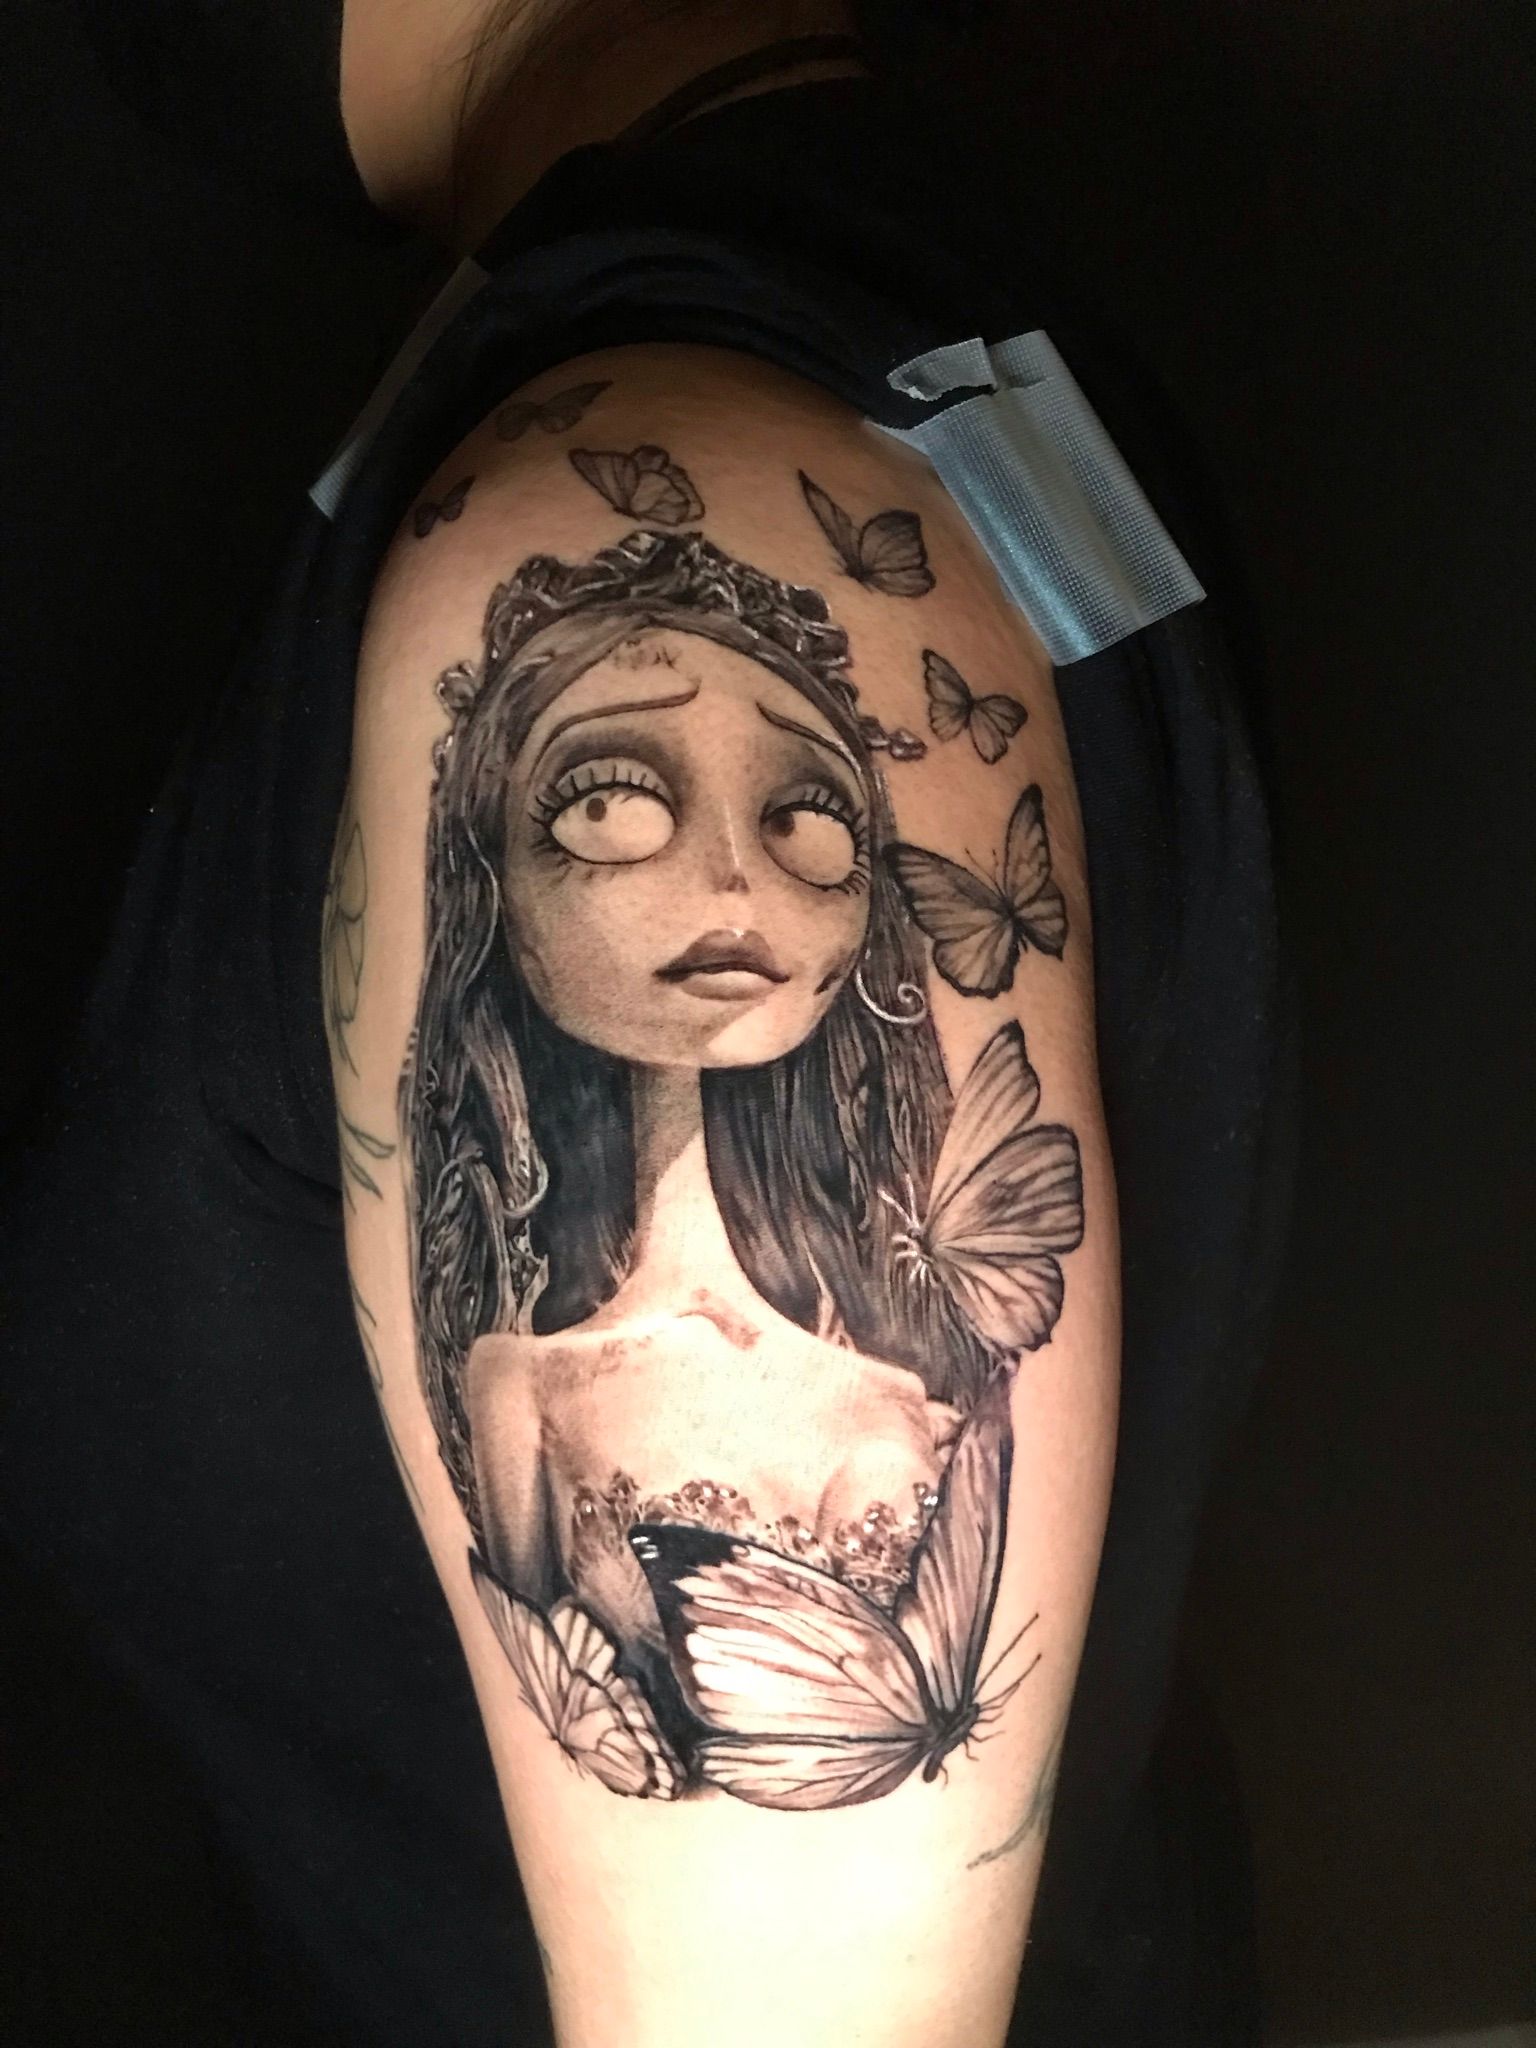 CVH Tattoos  Designs  Emily from The Corpse Bride I had the pleasure of  making for Sarah back in 2019     shinraelectrictattoo tattoo  tattoos tattooart corpsebride timburton timburtontattoo 